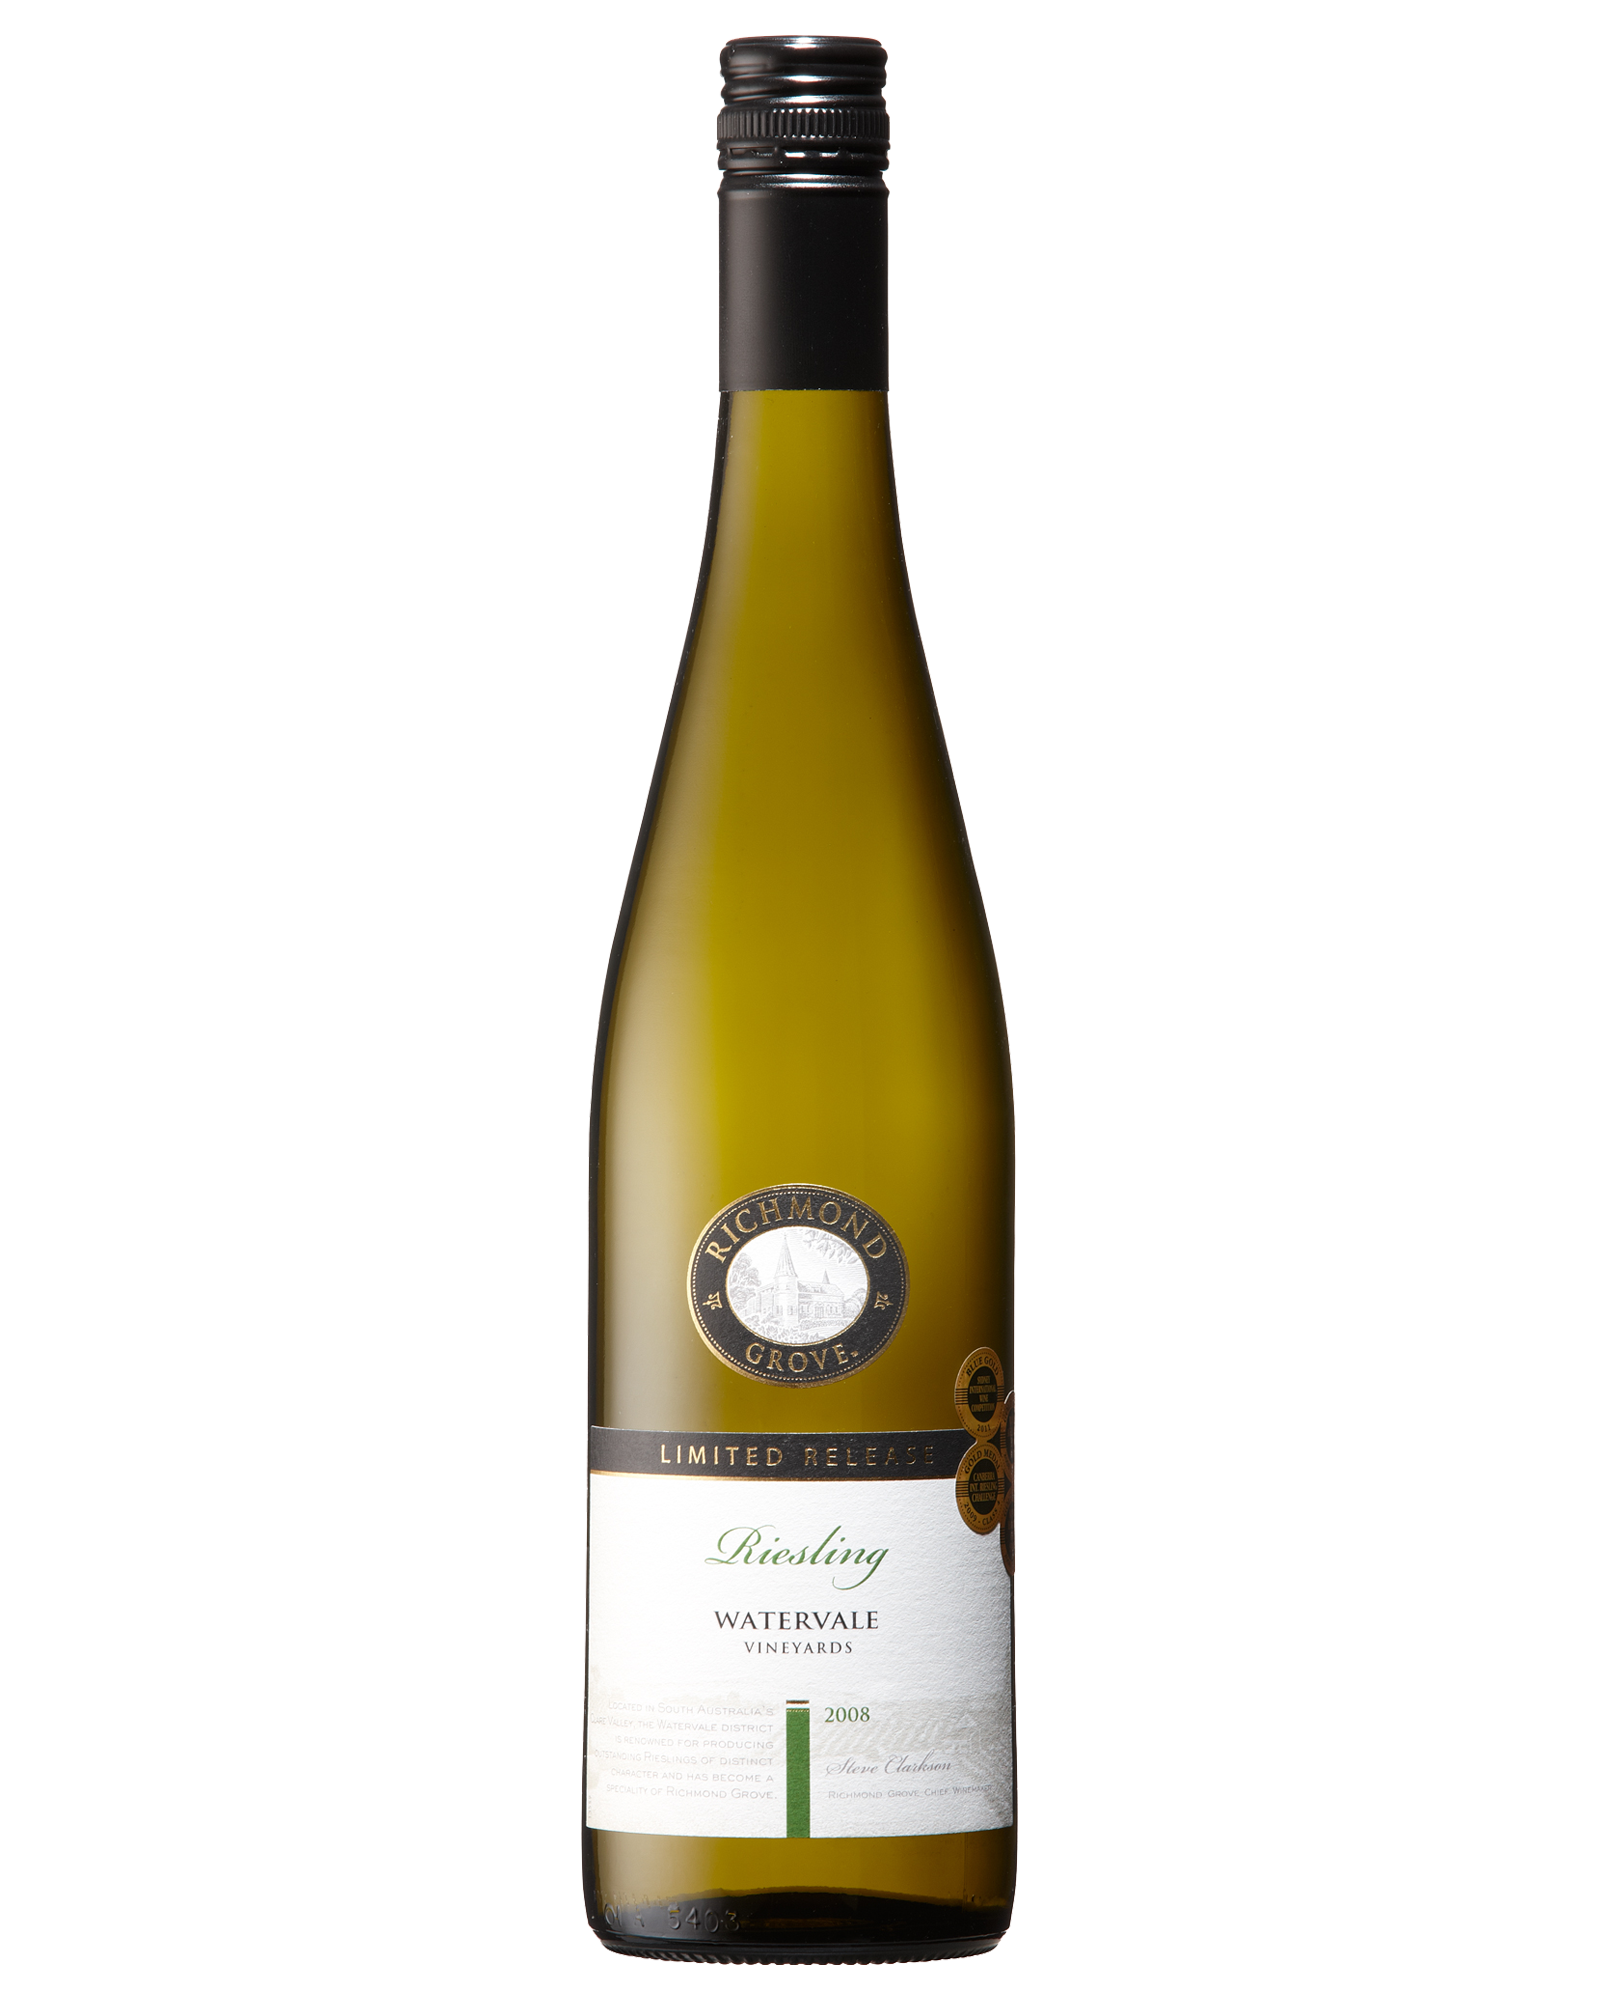 Richmond Grove Limited Release Riesling 2008